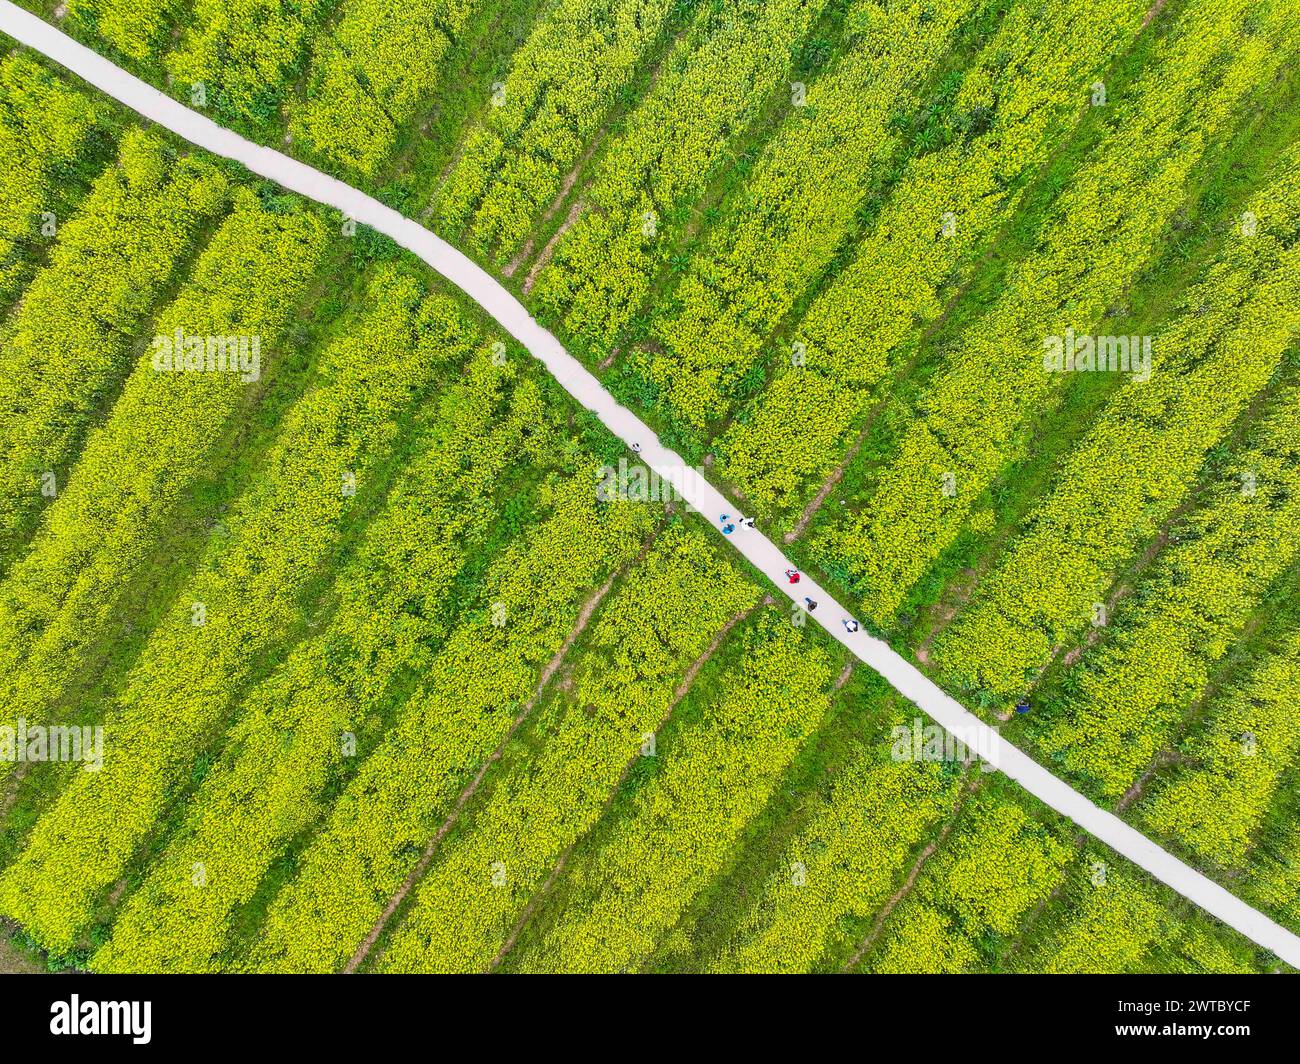 (240317) -- CHONGQING, March 17, 2024 (Xinhua) -- An aerial drone photo shows fields of cole flowers at Guangyang Isle in southwest China's Chongqing, March 16, 2024. Guangyang Isle, the most extensive green island in the upper reaches of the Yangtze River, has been turned into an ecological restoration and protection 'classroom' for ecotourists and school children.The local ecosystem and biodiversity were once seriously threatened due to real-estate projects in the area. However, the local government brought harmful projects of this sort to a halt in 2017, starting the restoration of the envi Stock Photo